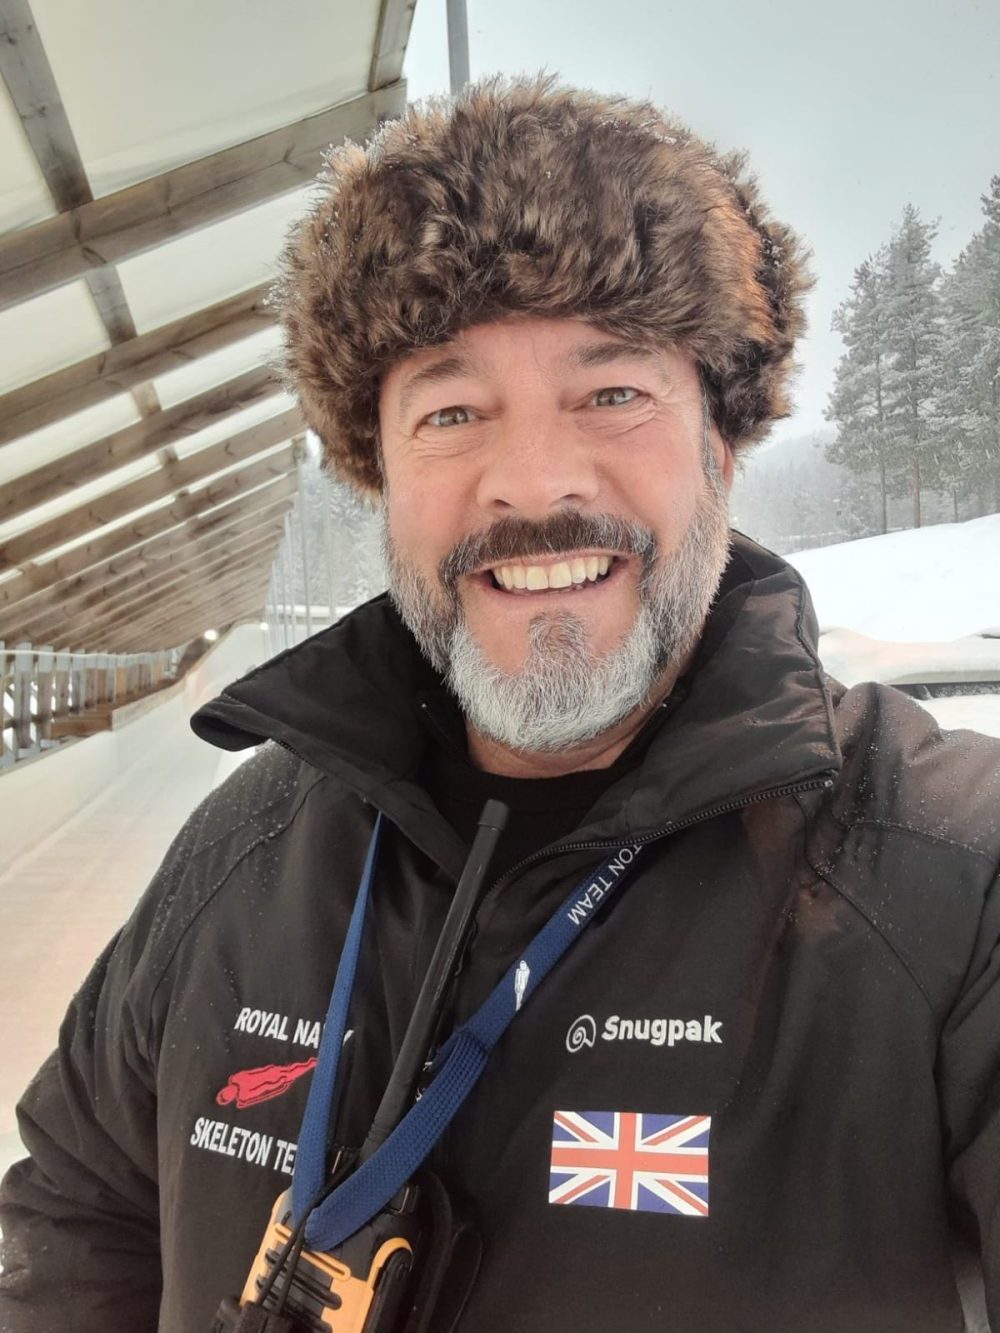 Meet Sid, coach and founder of the Royal Navy Skeleton Team!